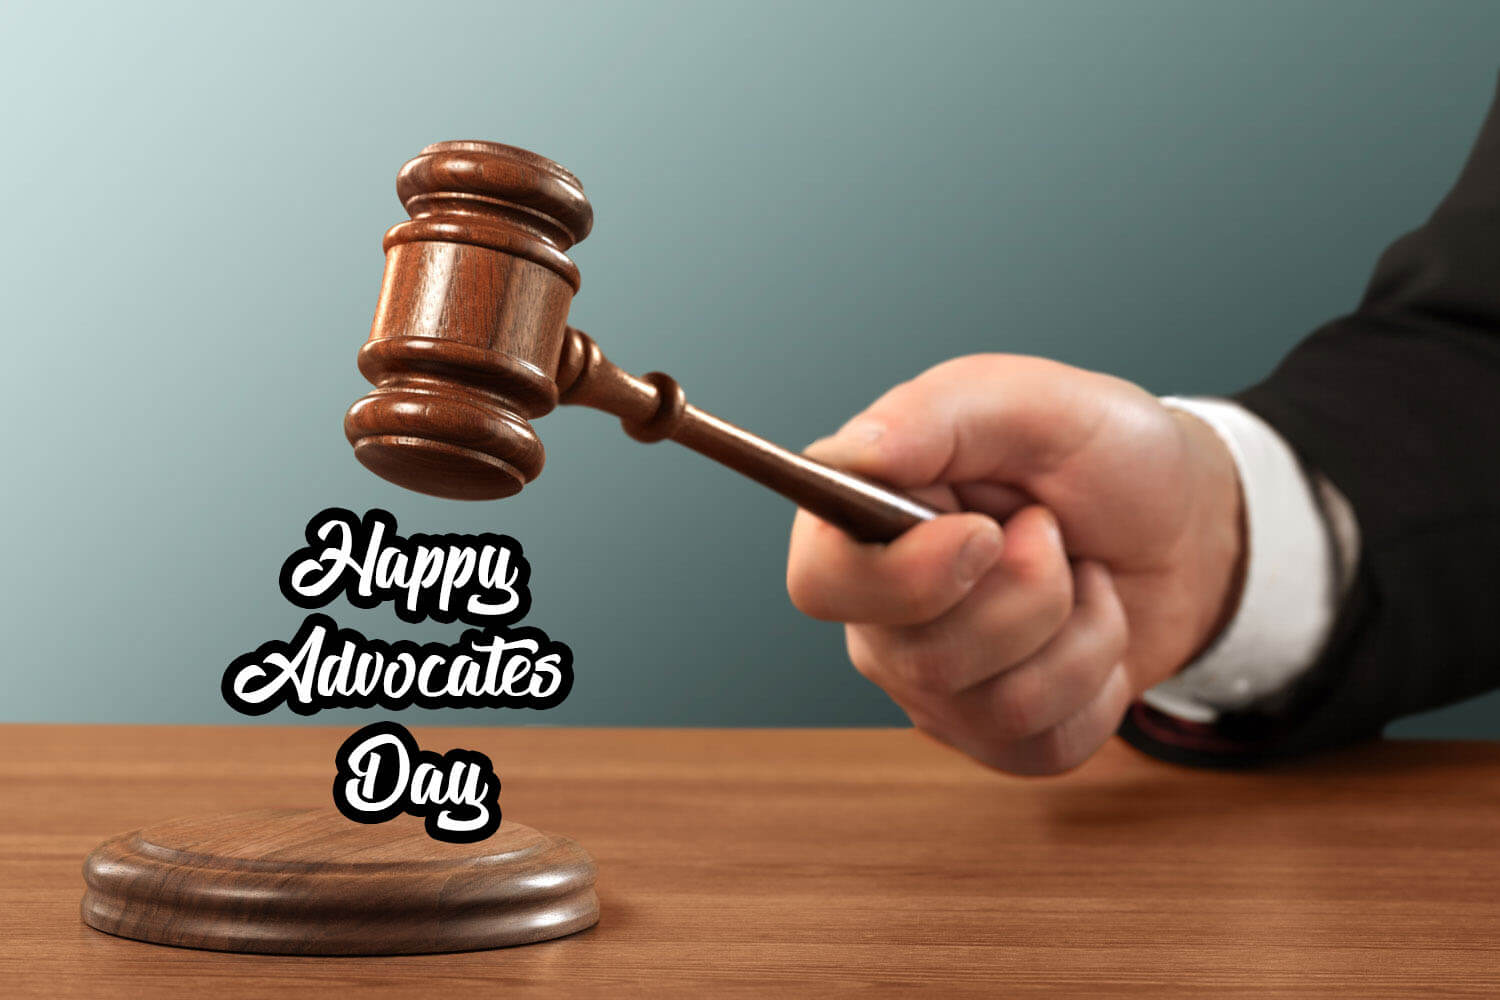 Happy Advocates Day Wishes Greetings Law Judge Justice - Law Hammer With Hand , HD Wallpaper & Backgrounds